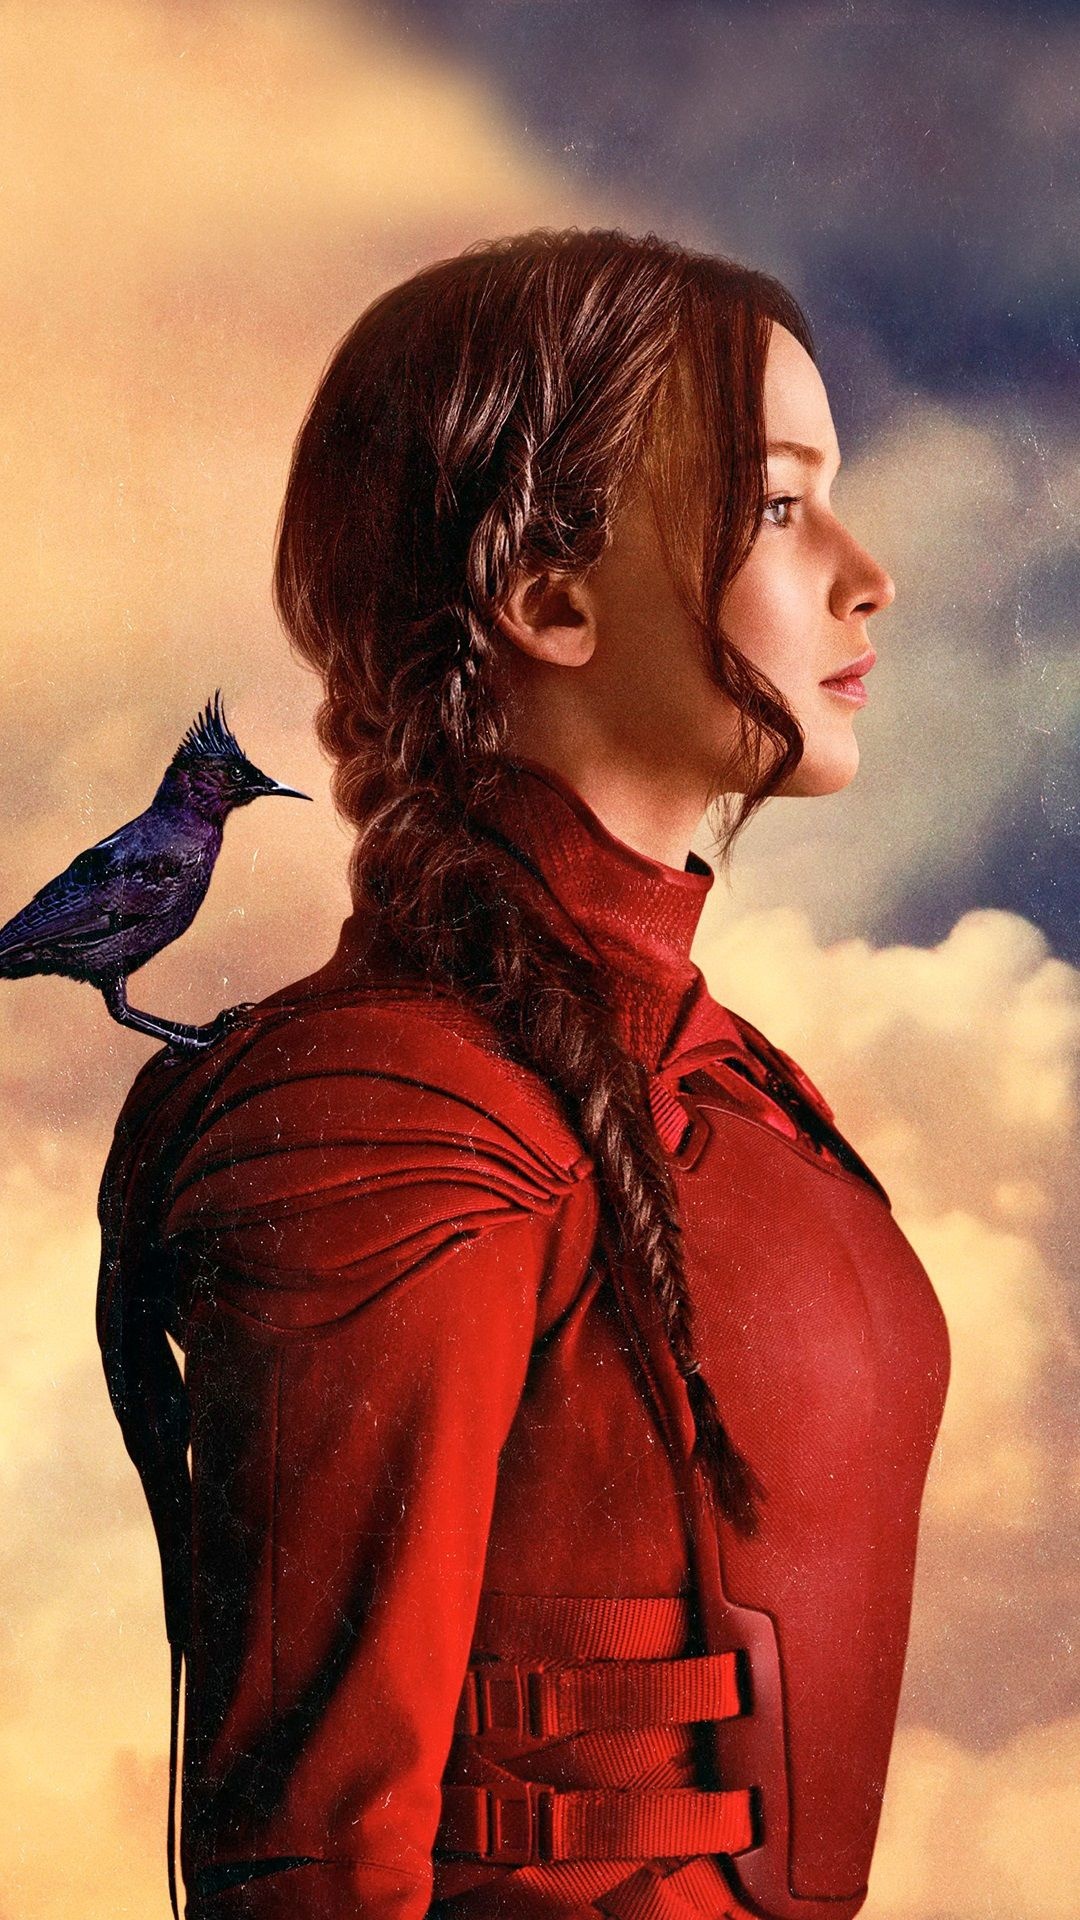 Jennifer Lawrence, The Hunger Games, iPhone wallpaper, Hunger Games poster, 1080x1920 Full HD Phone